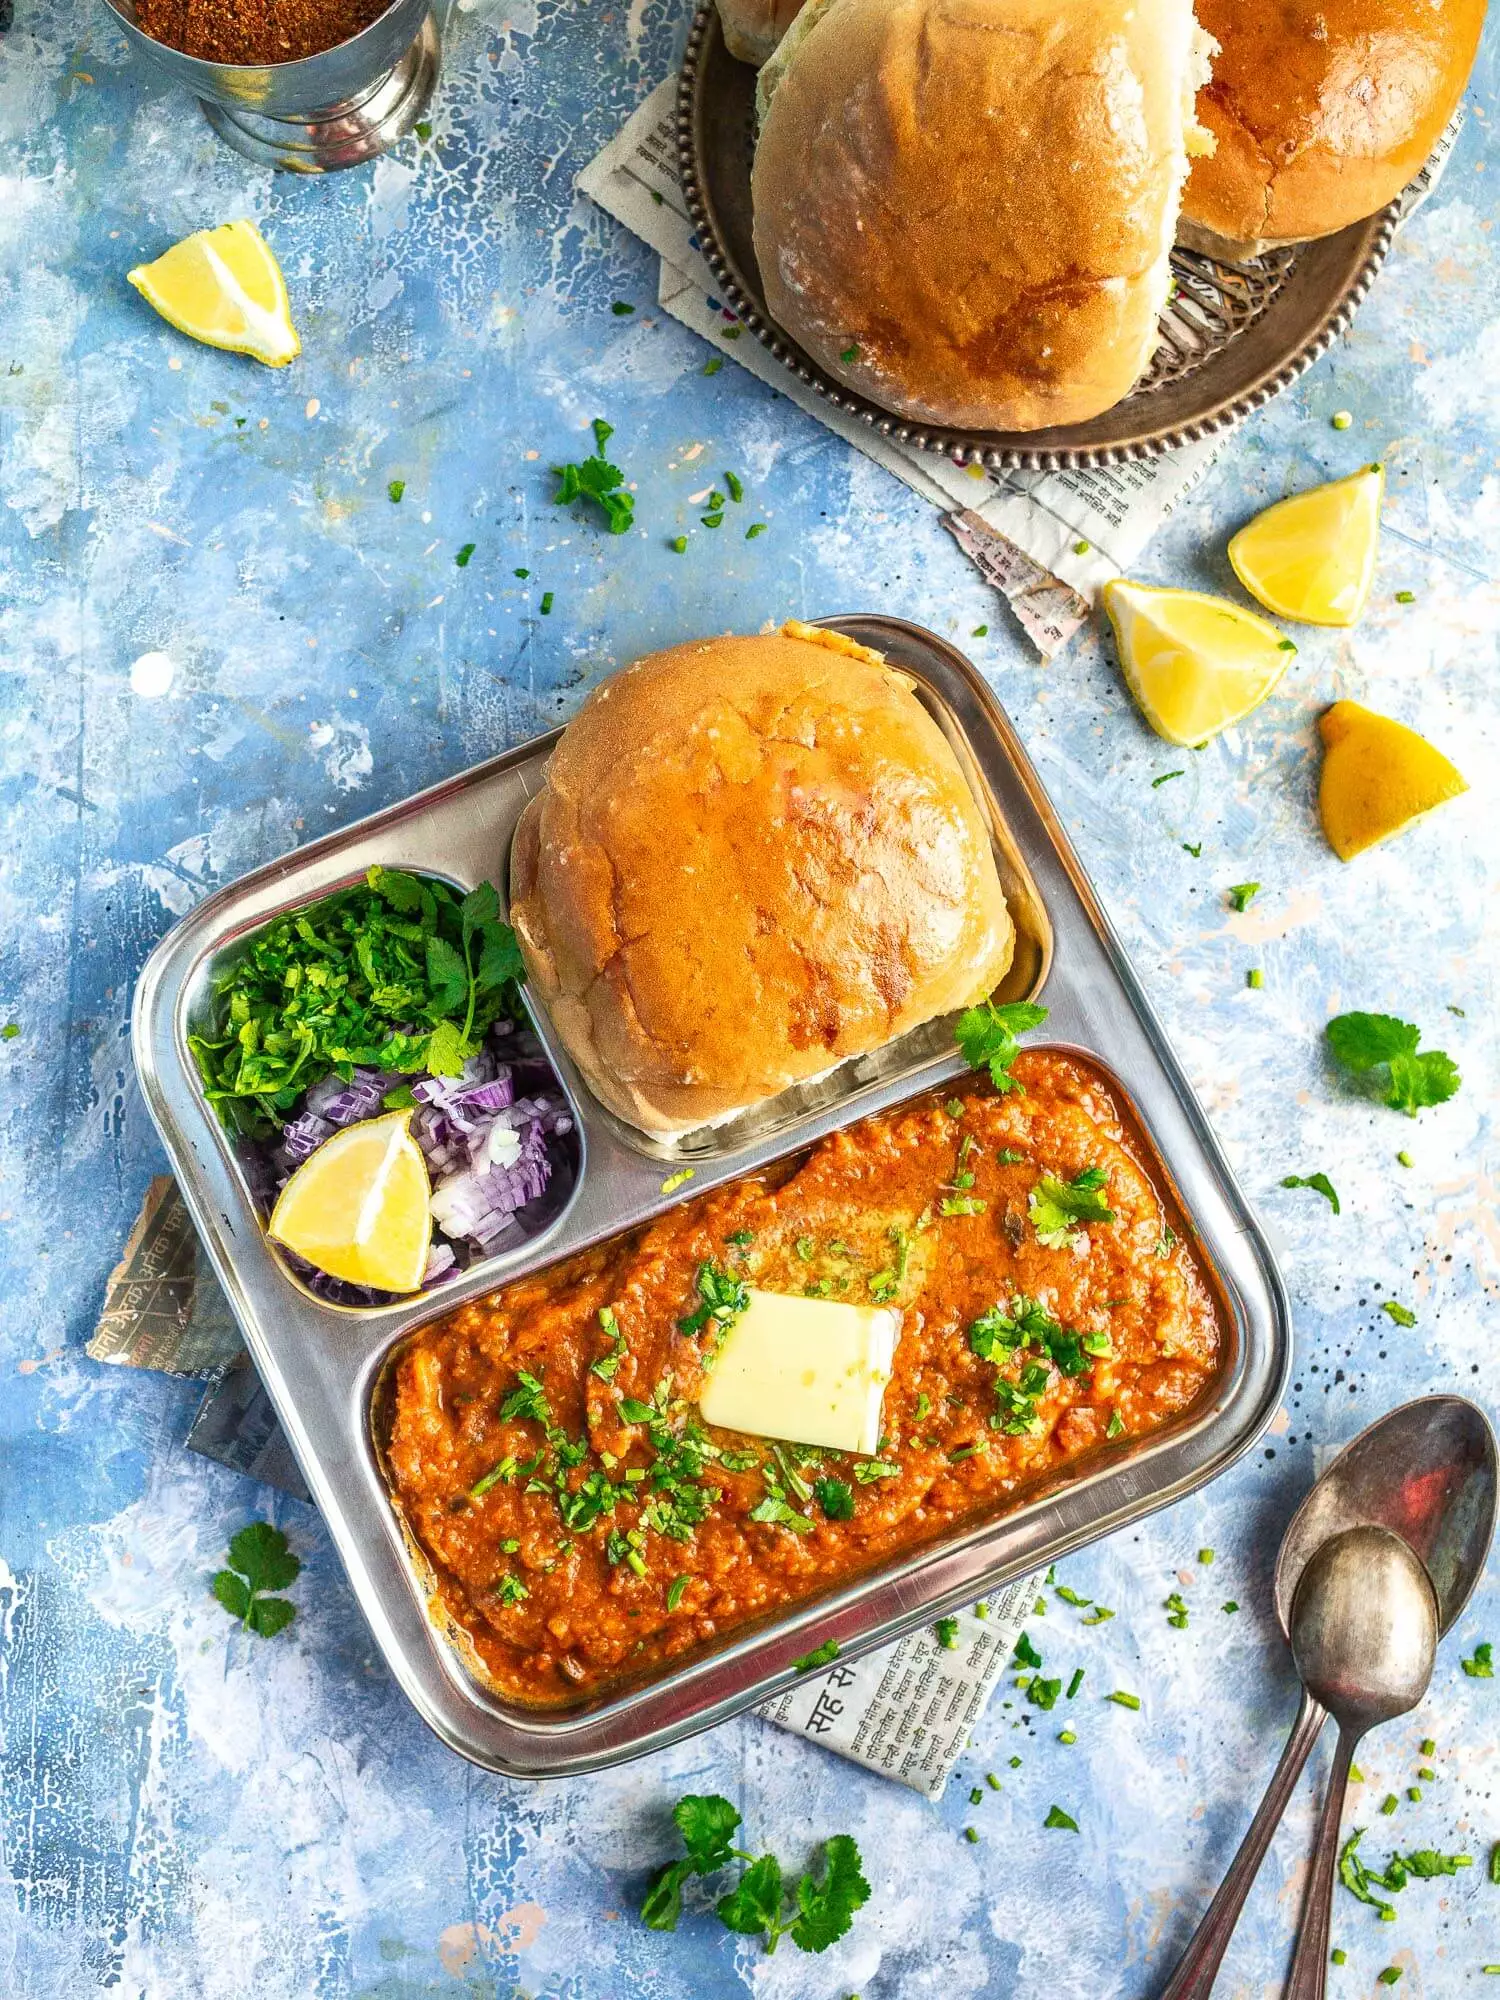 Pav bhaji in a metal tray on a blue background, with pav in the background.